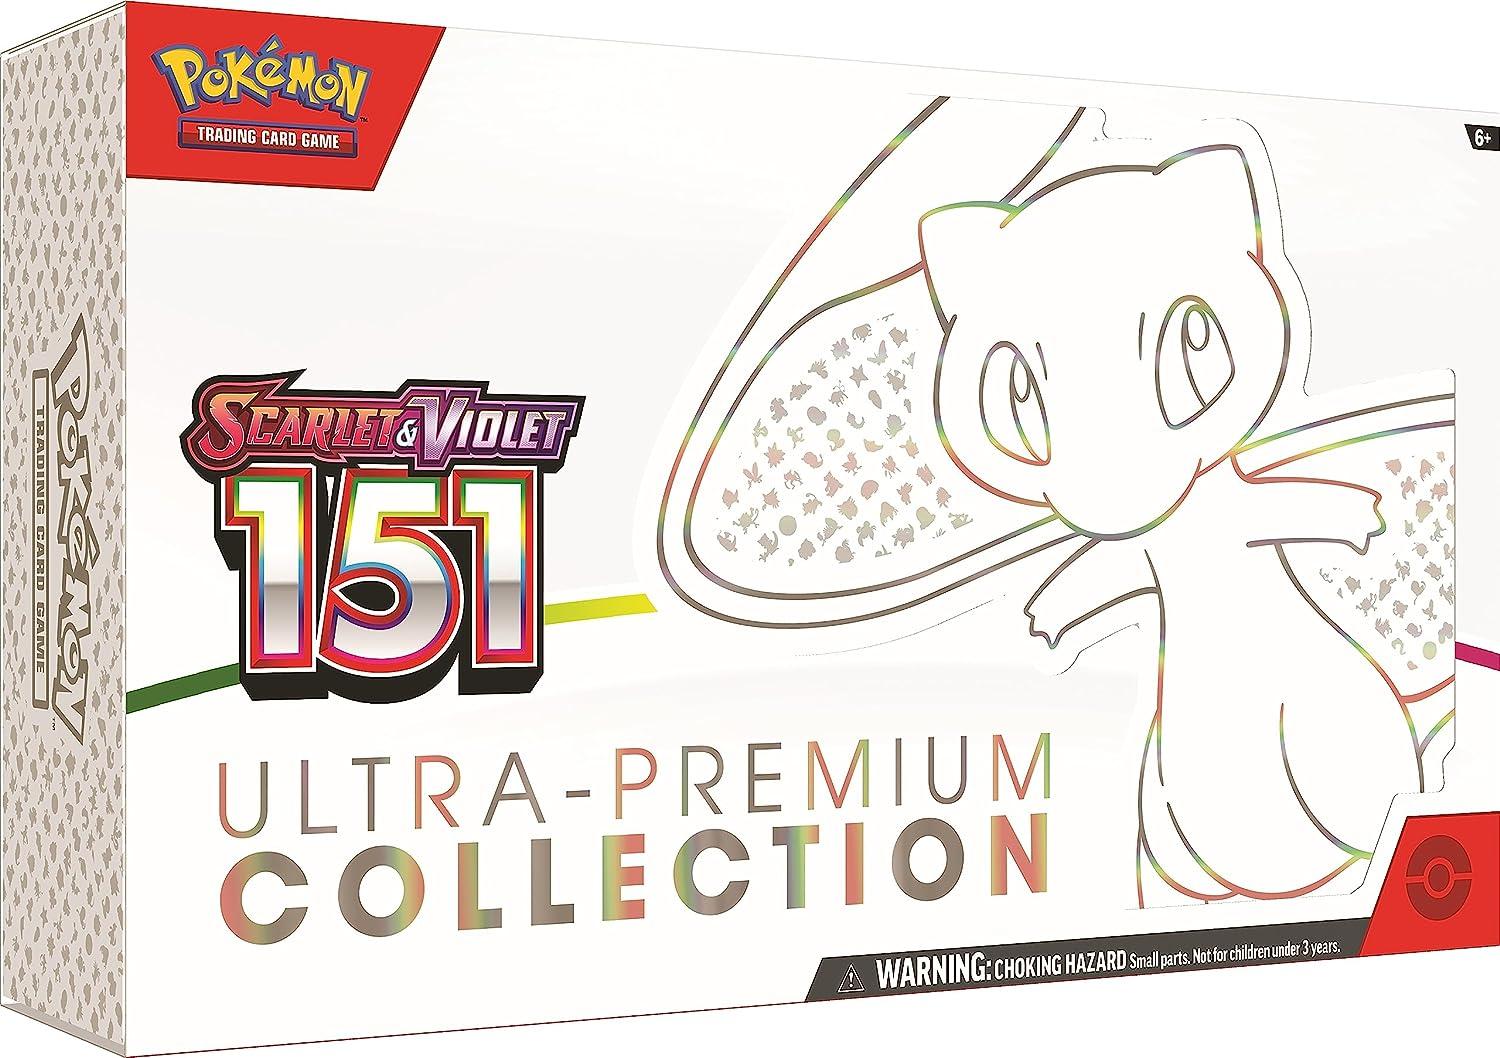 Pokemon Trading Card Game: Scarlet and Violet 151 Collection for $95.99 Shipped